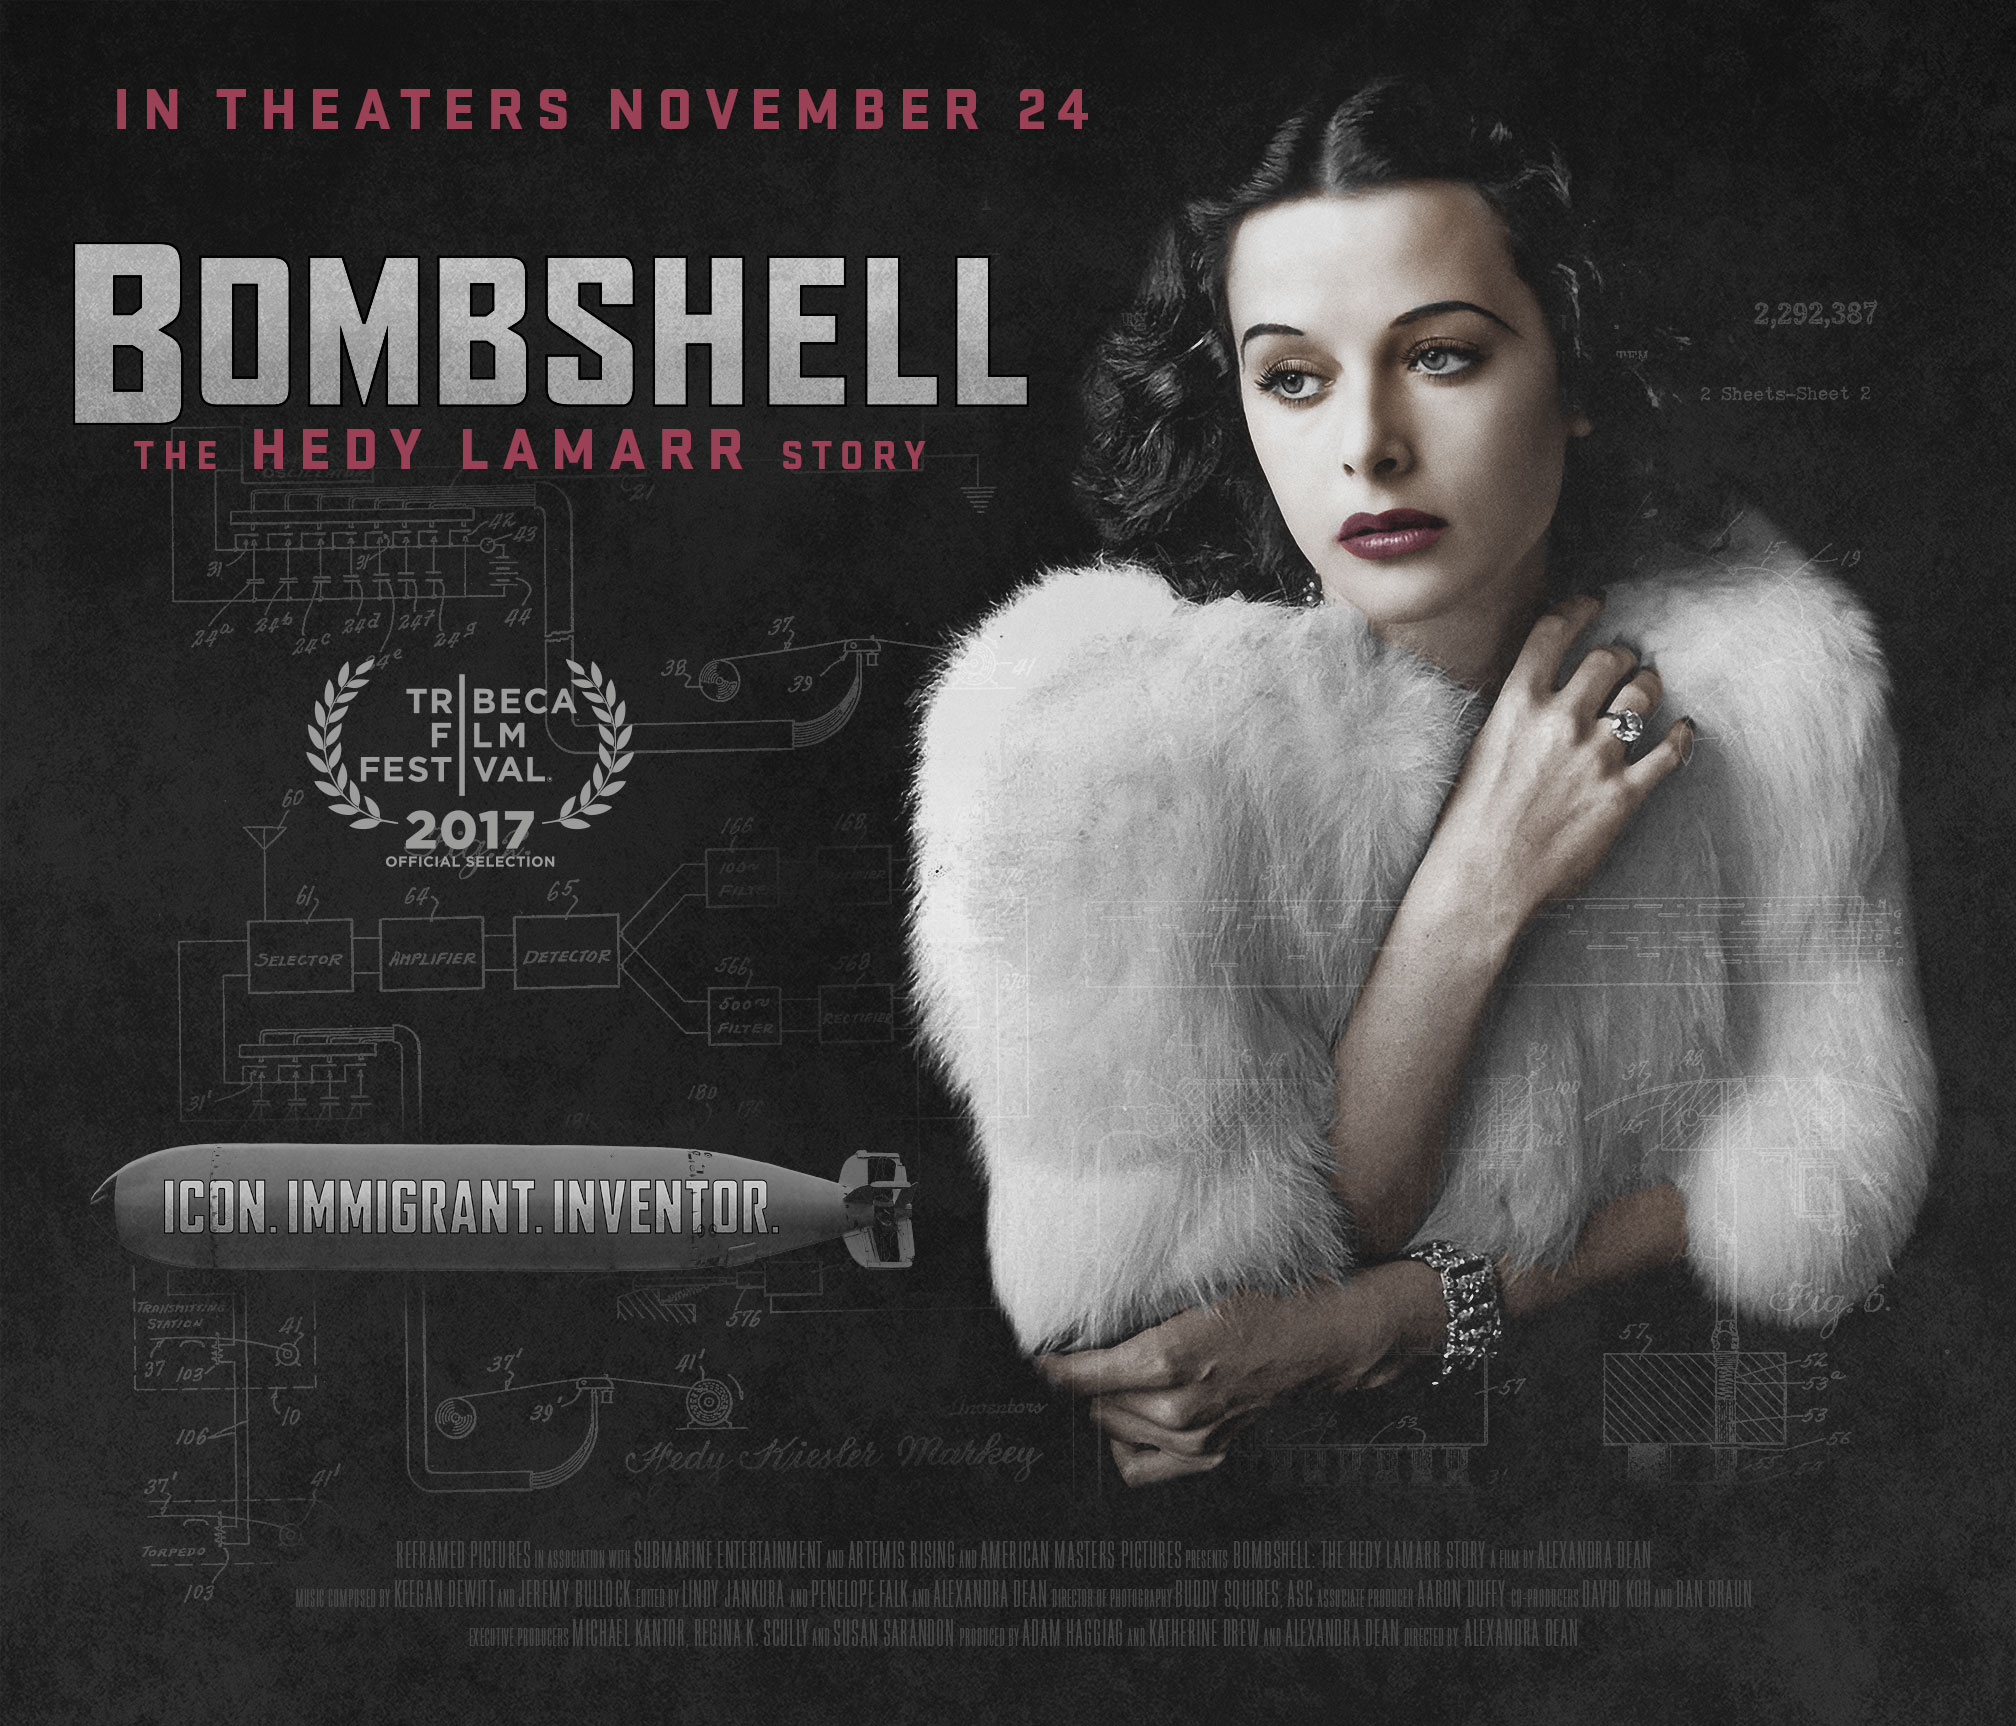 BOMBSHELL - THE HEDY LAMARR STORY